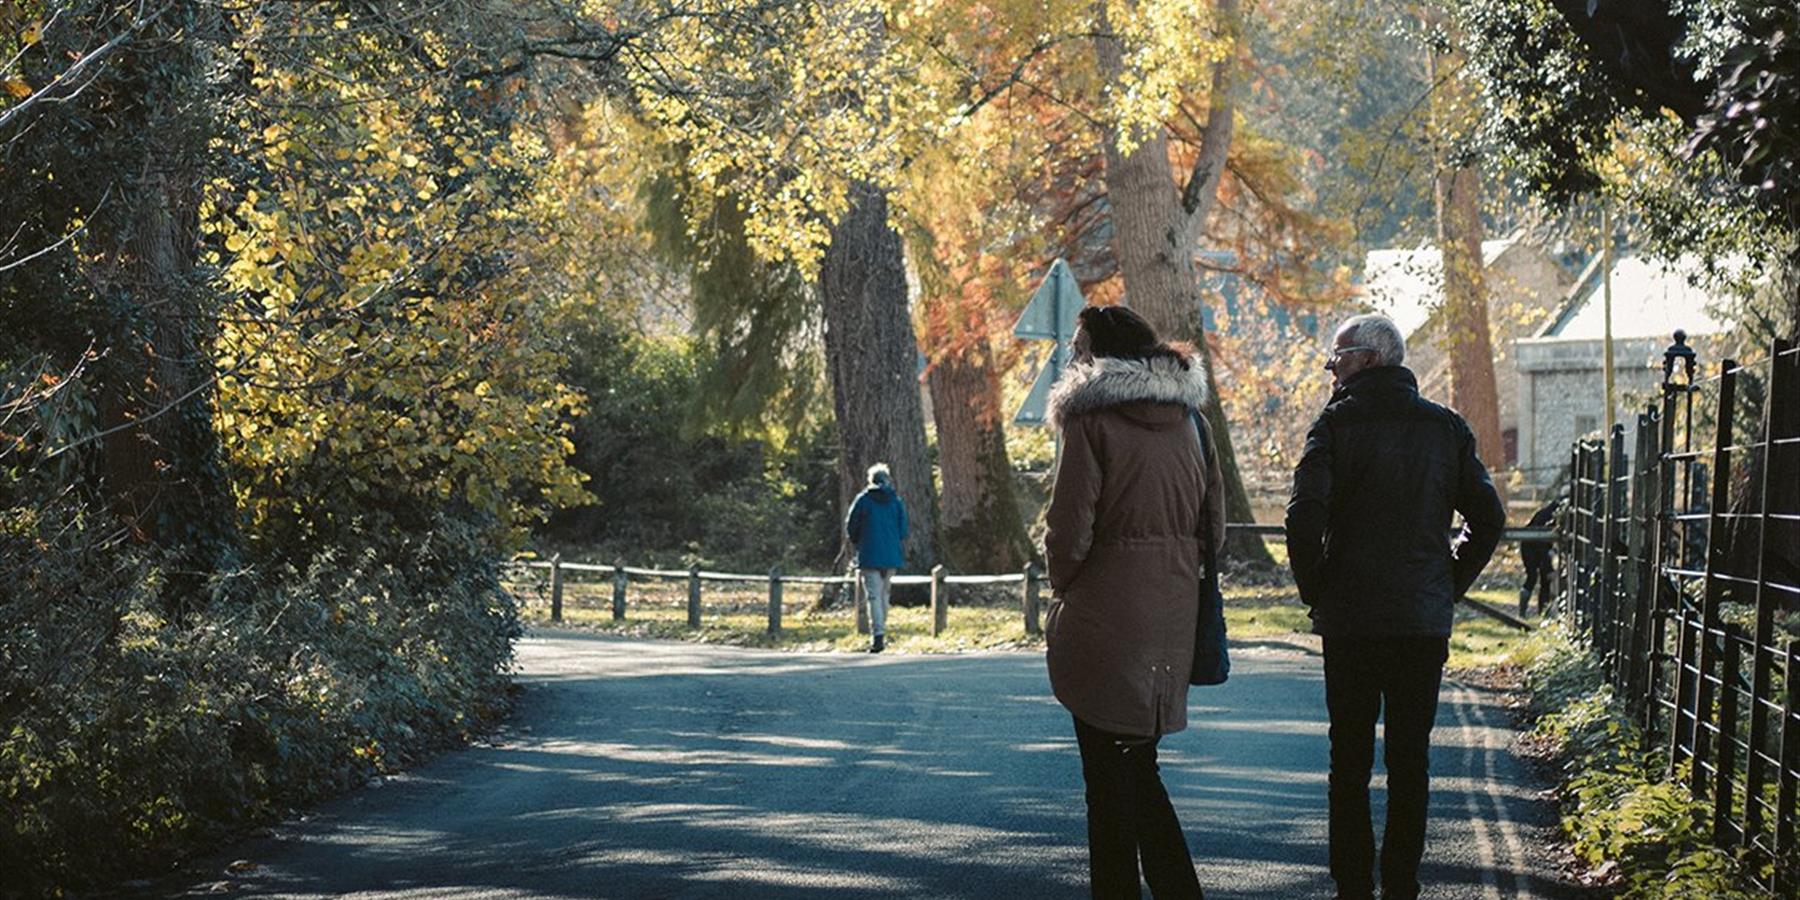 People walking in a park with trees